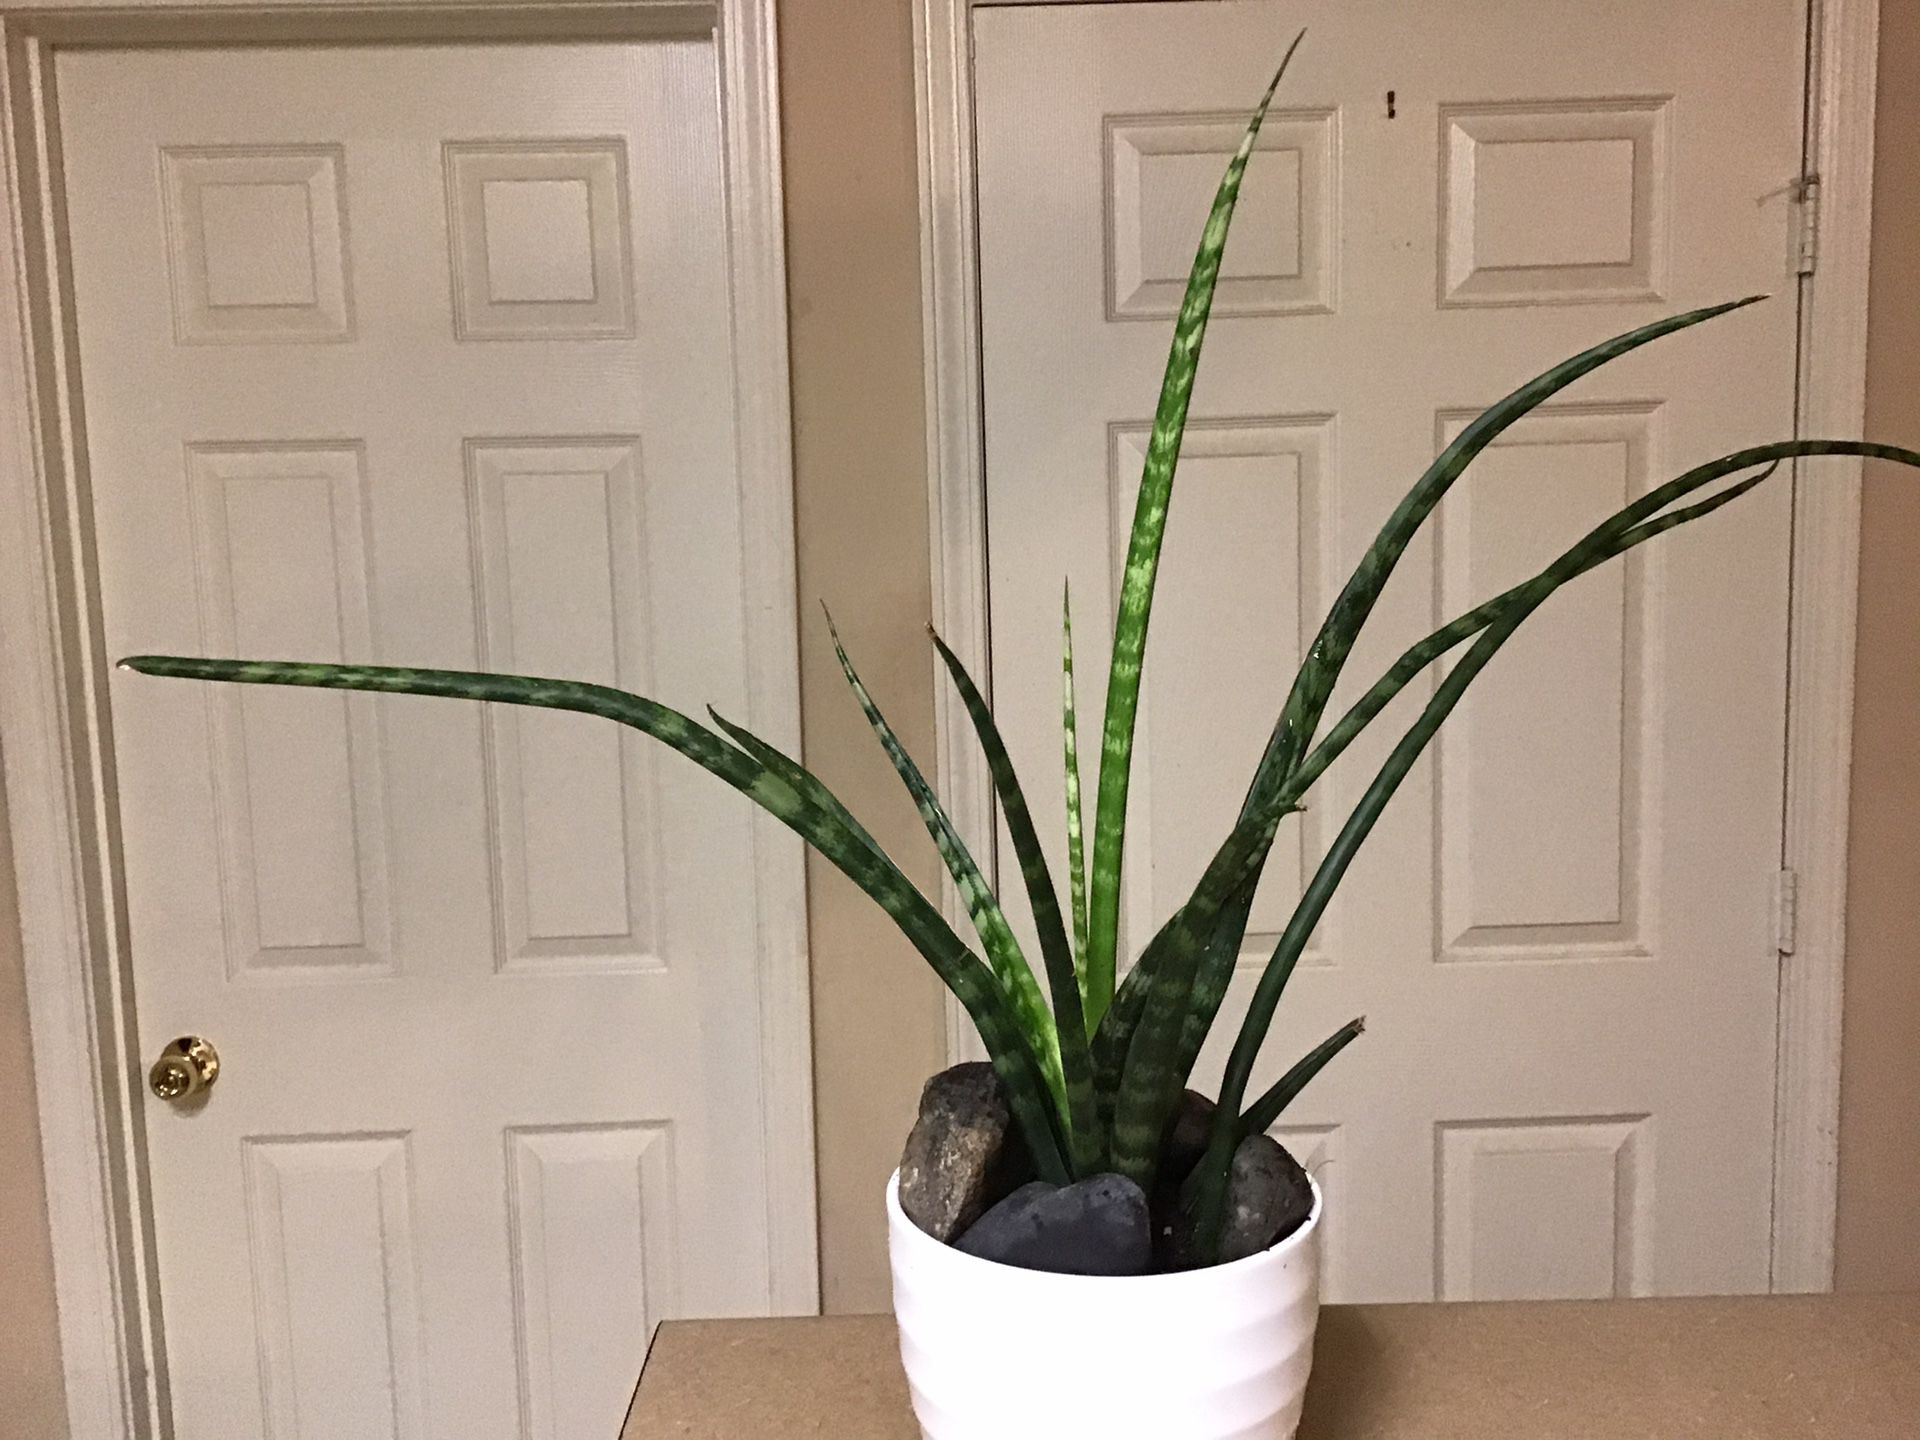 $10 - Sansevieria Cylindrica, Snake Plant, African Spear, Succulent